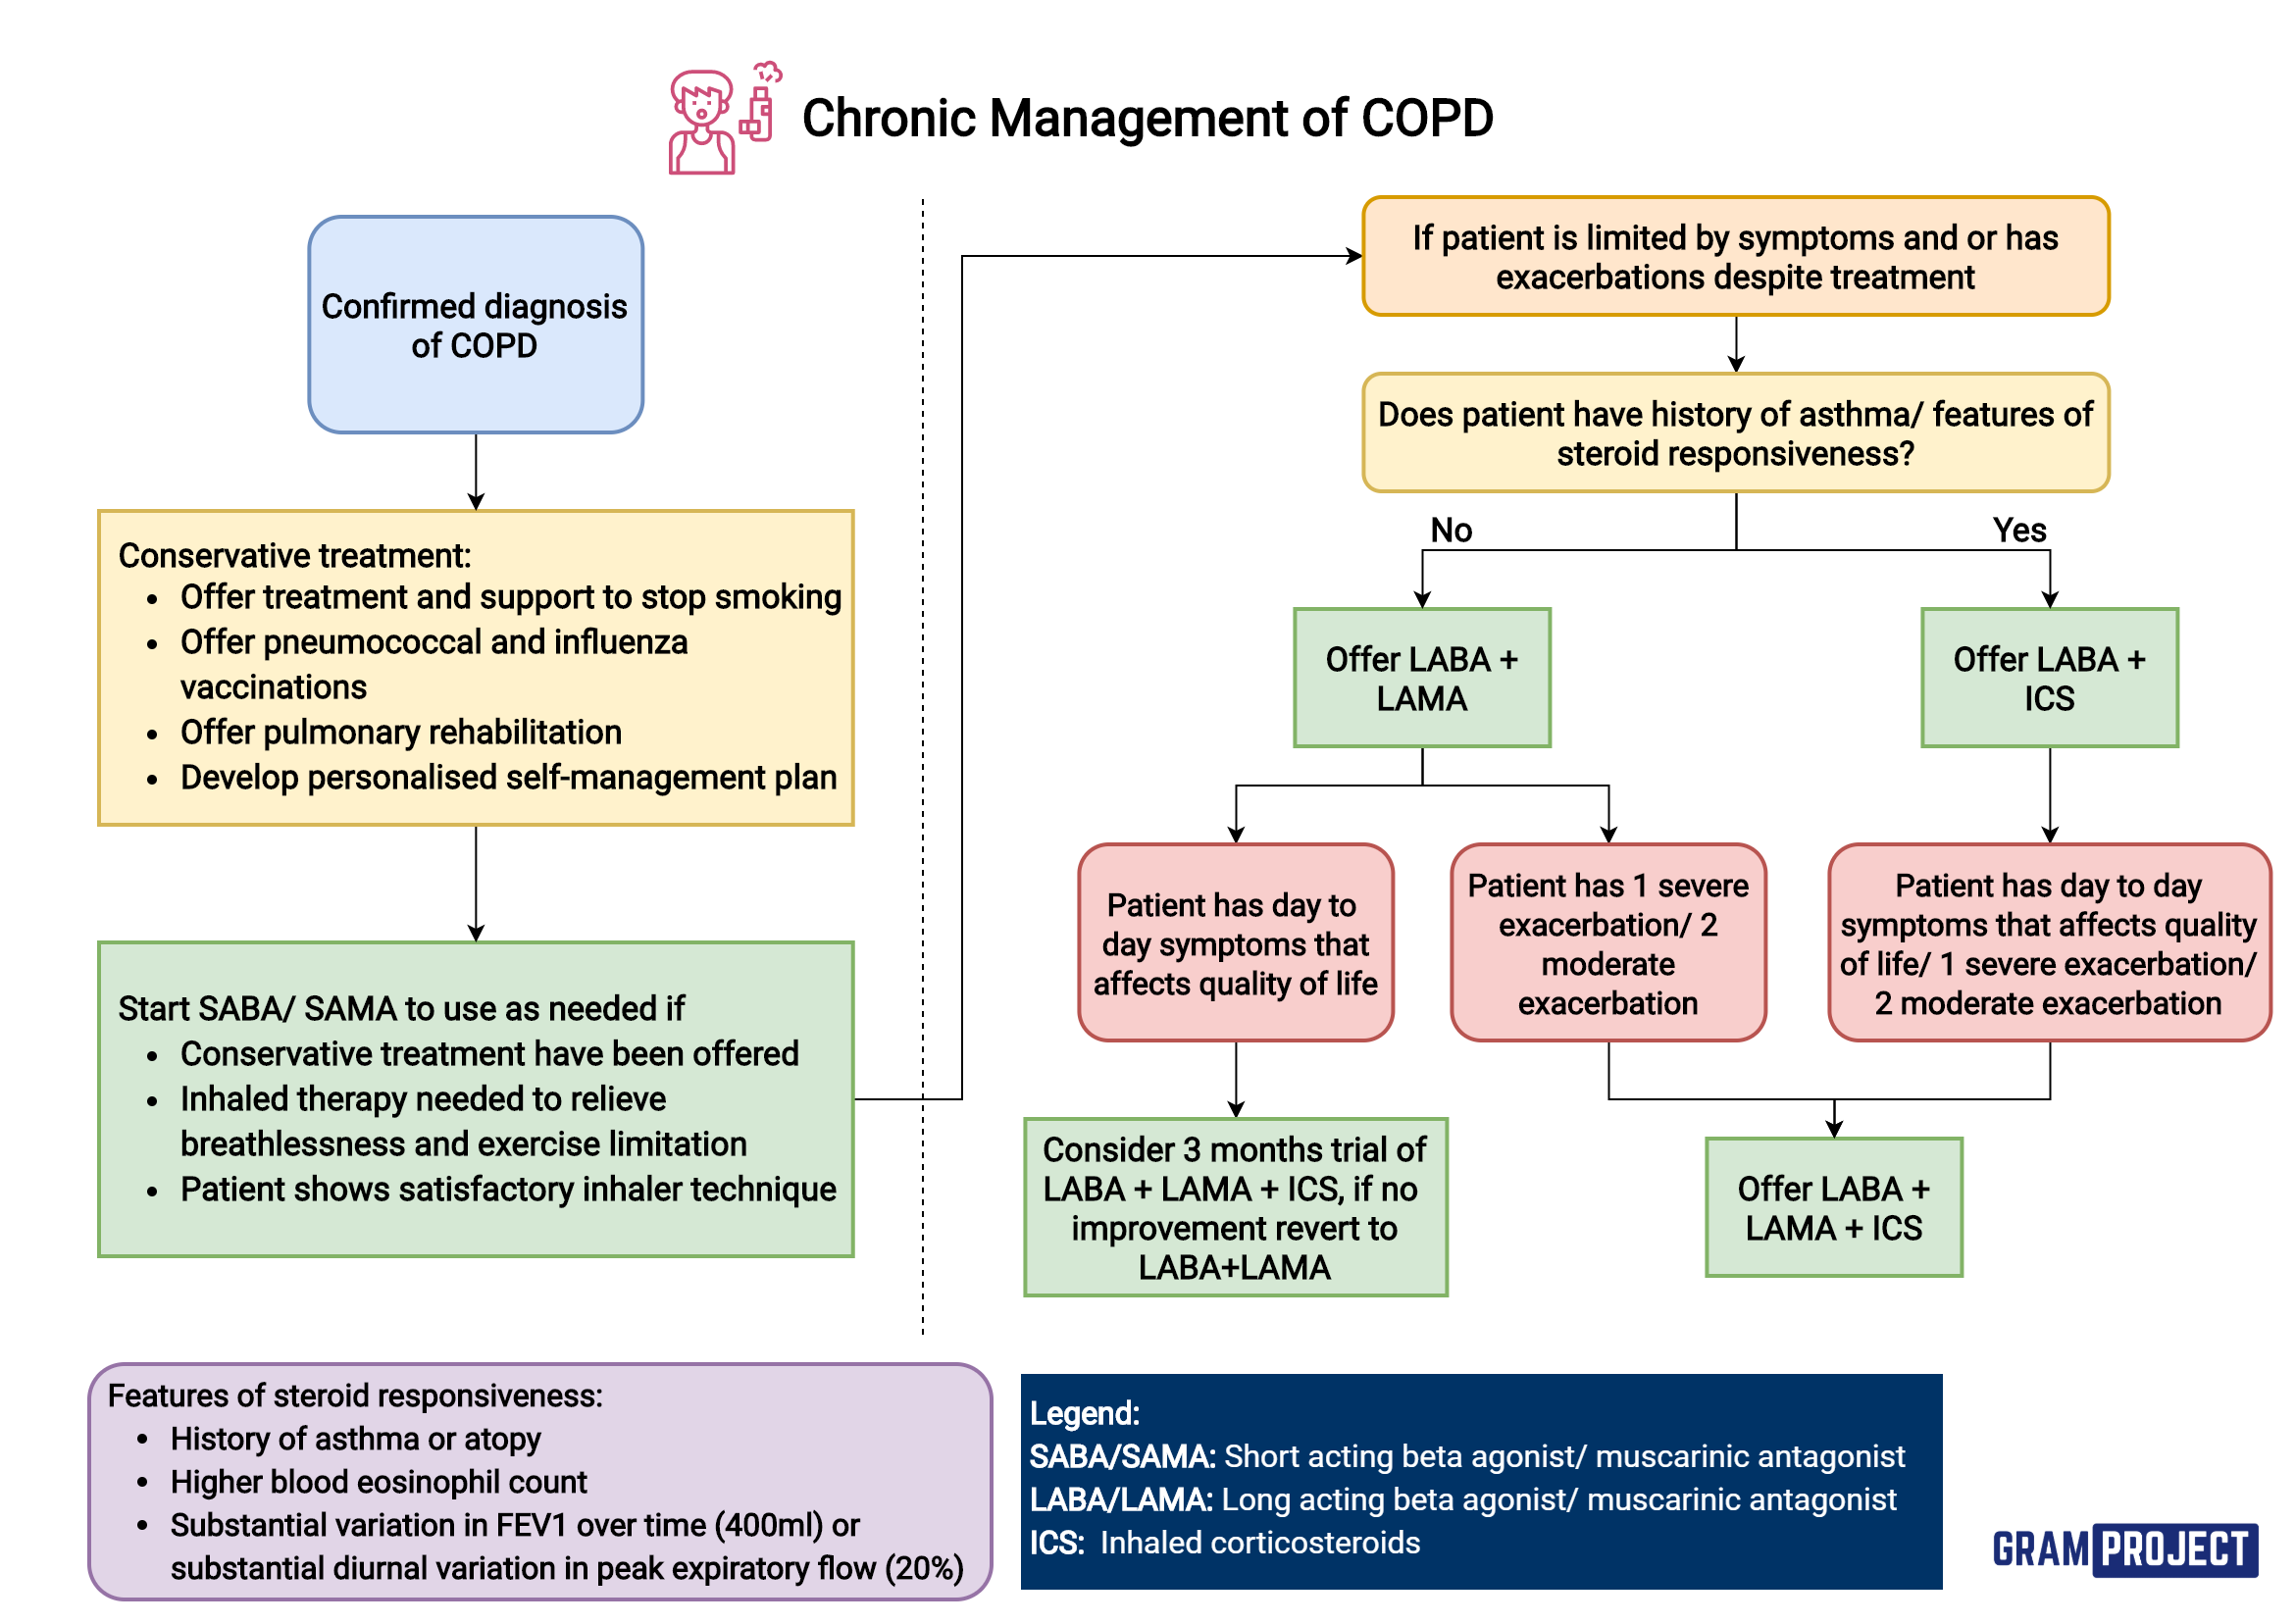 Flowchart of chronic management of COPD based on NICE guidelines